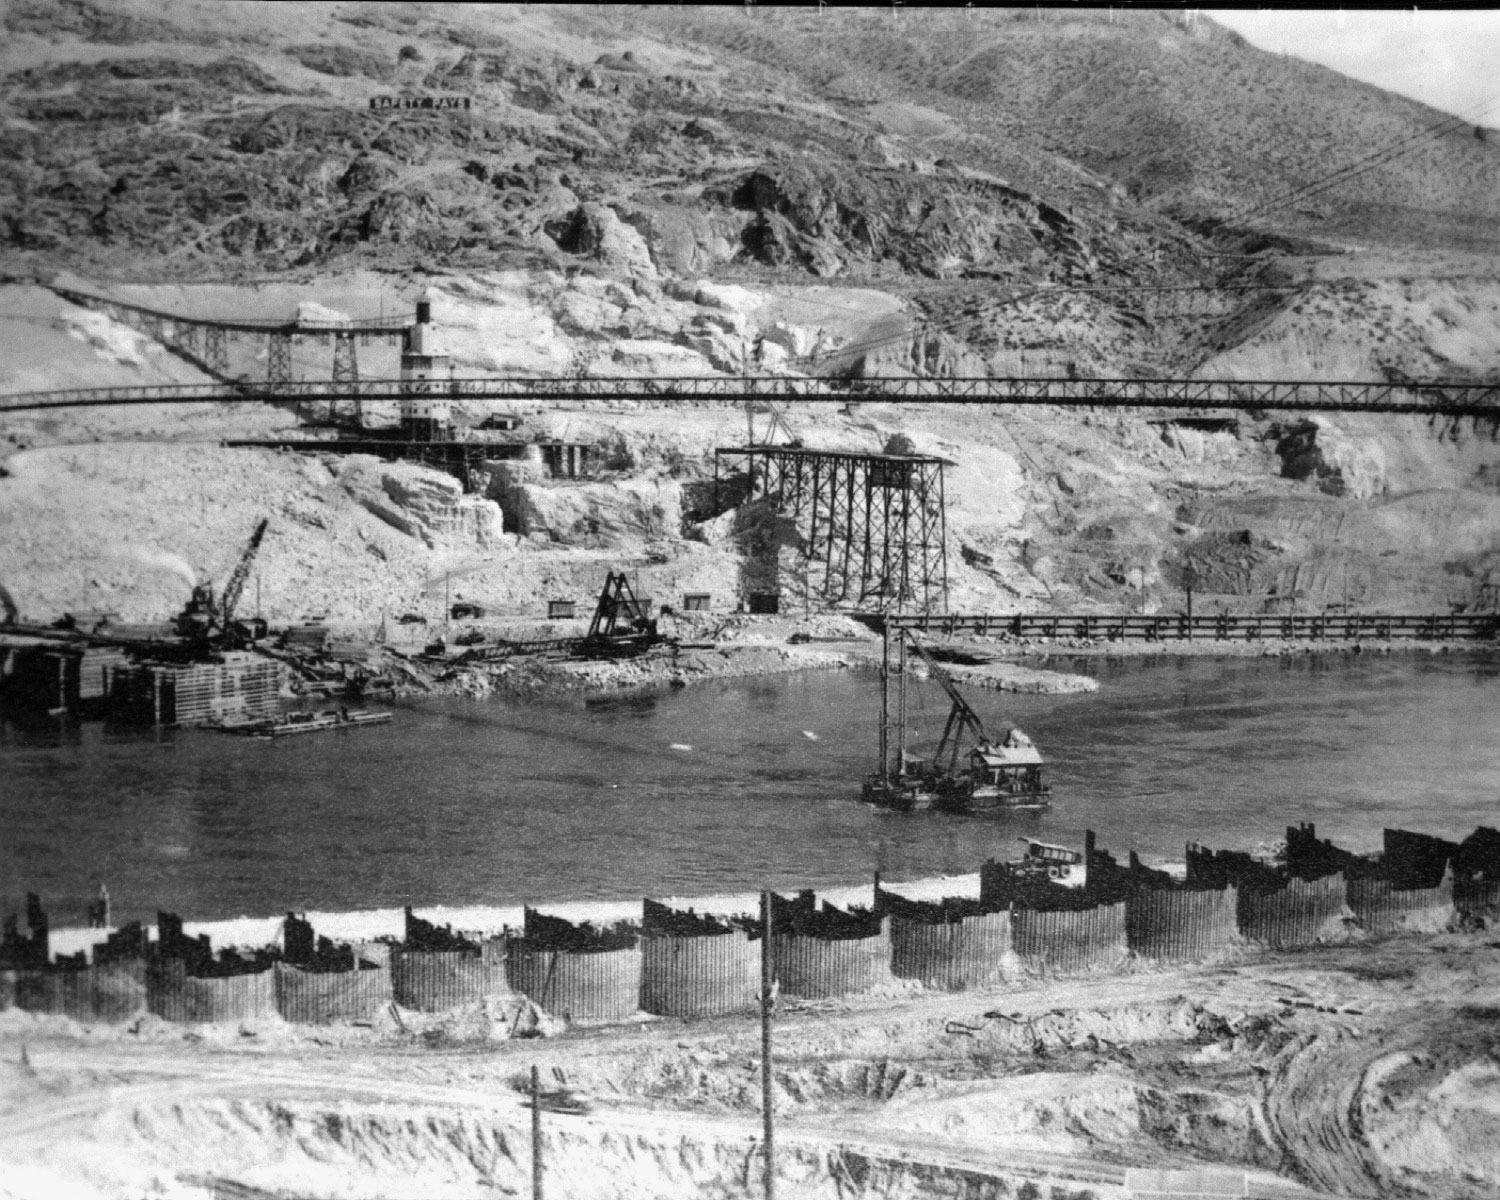 Photo taken August 8, 1936. Cross river spoils conveyor going to Rattlesnake Canyon center with west mix plant behind. Low Wakefield cofferdam on eastside in foreground at Grand Coulee Dam.